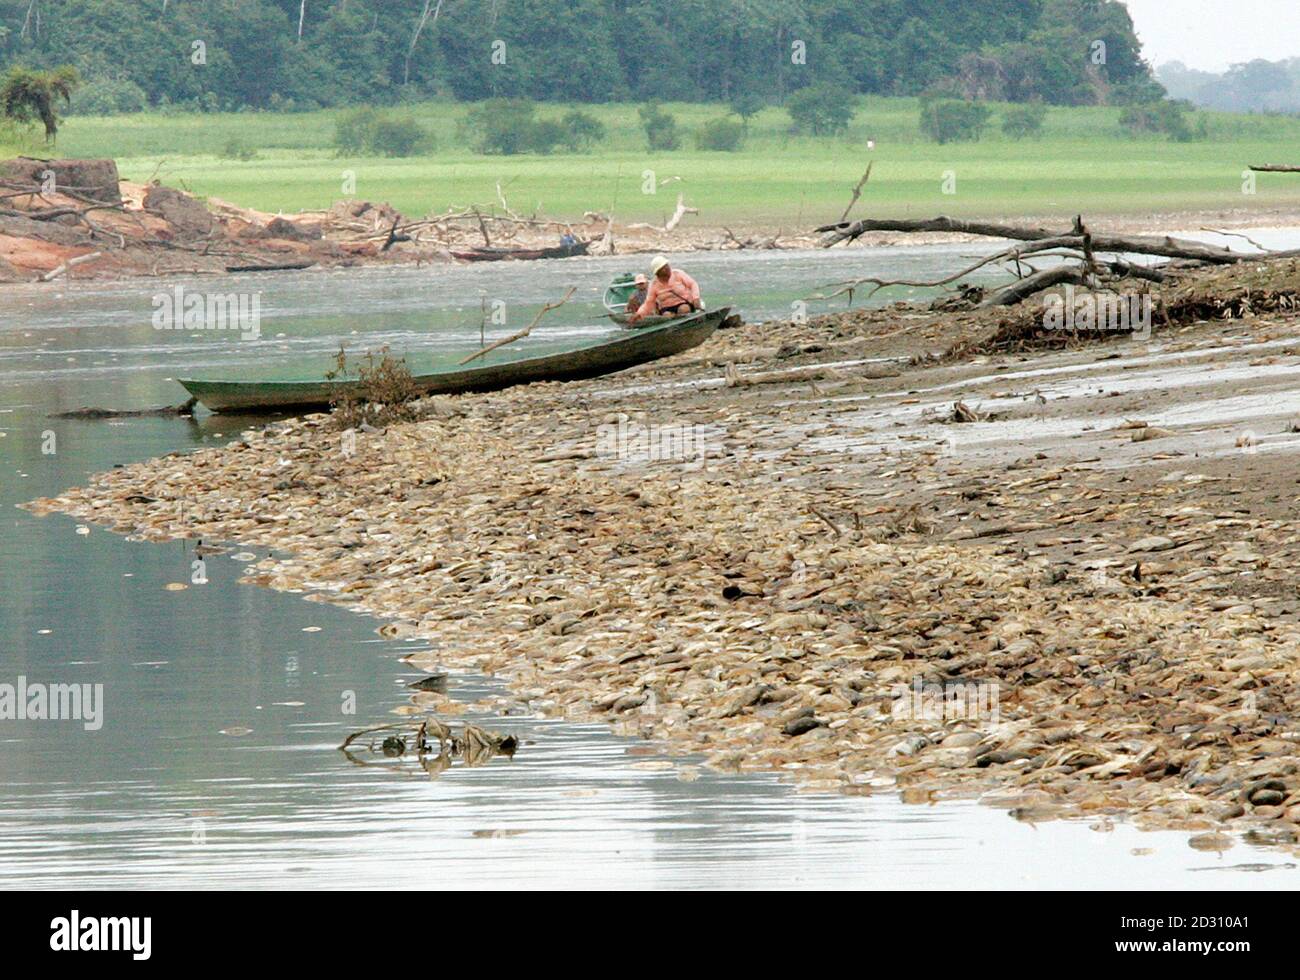 A family paddles their canoe along a river bank littered with countless  dead fish rotting in the Parana de Manaquiri River, a tributary to the  Amazon River, near the city of Manaquiri,